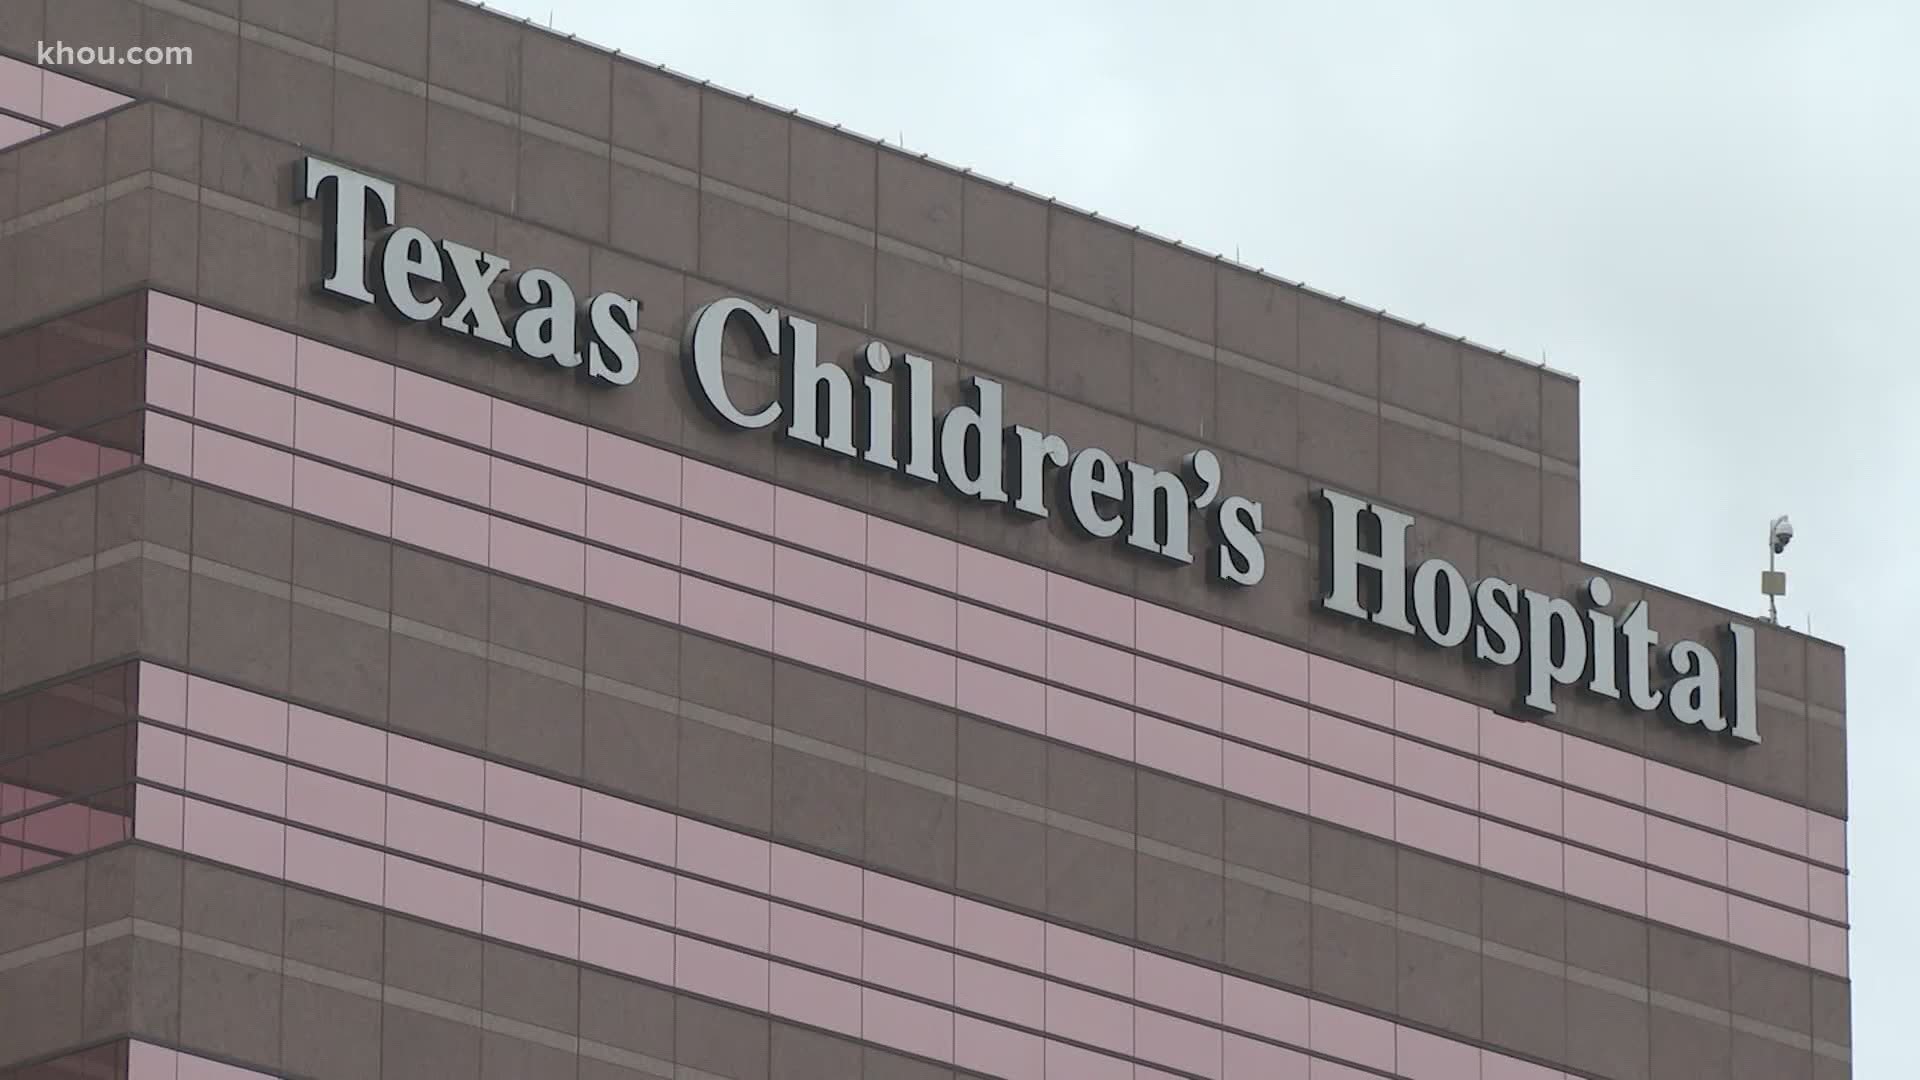 Houston COVID19 Texas Children's Hospital takes adult patients